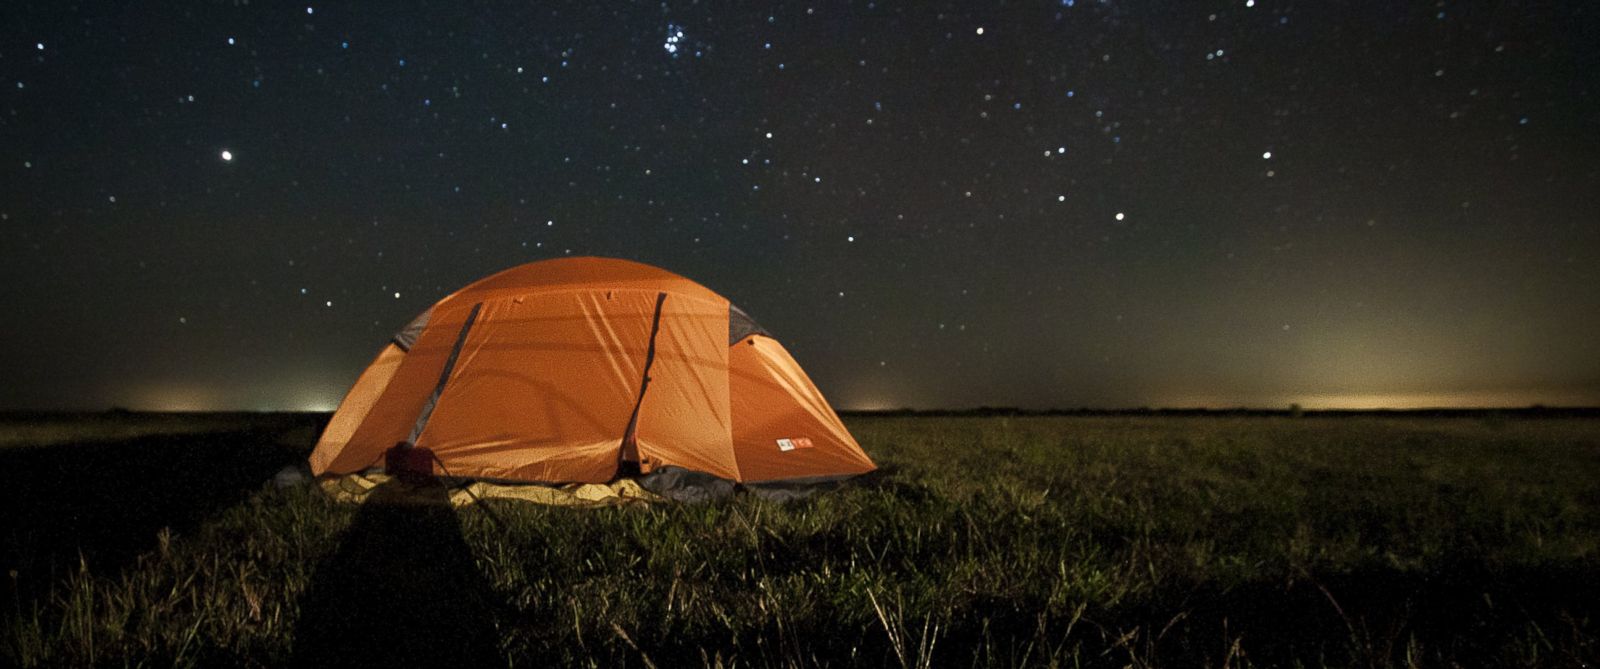 High Resolution Wallpaper | Camping 1600x669 px